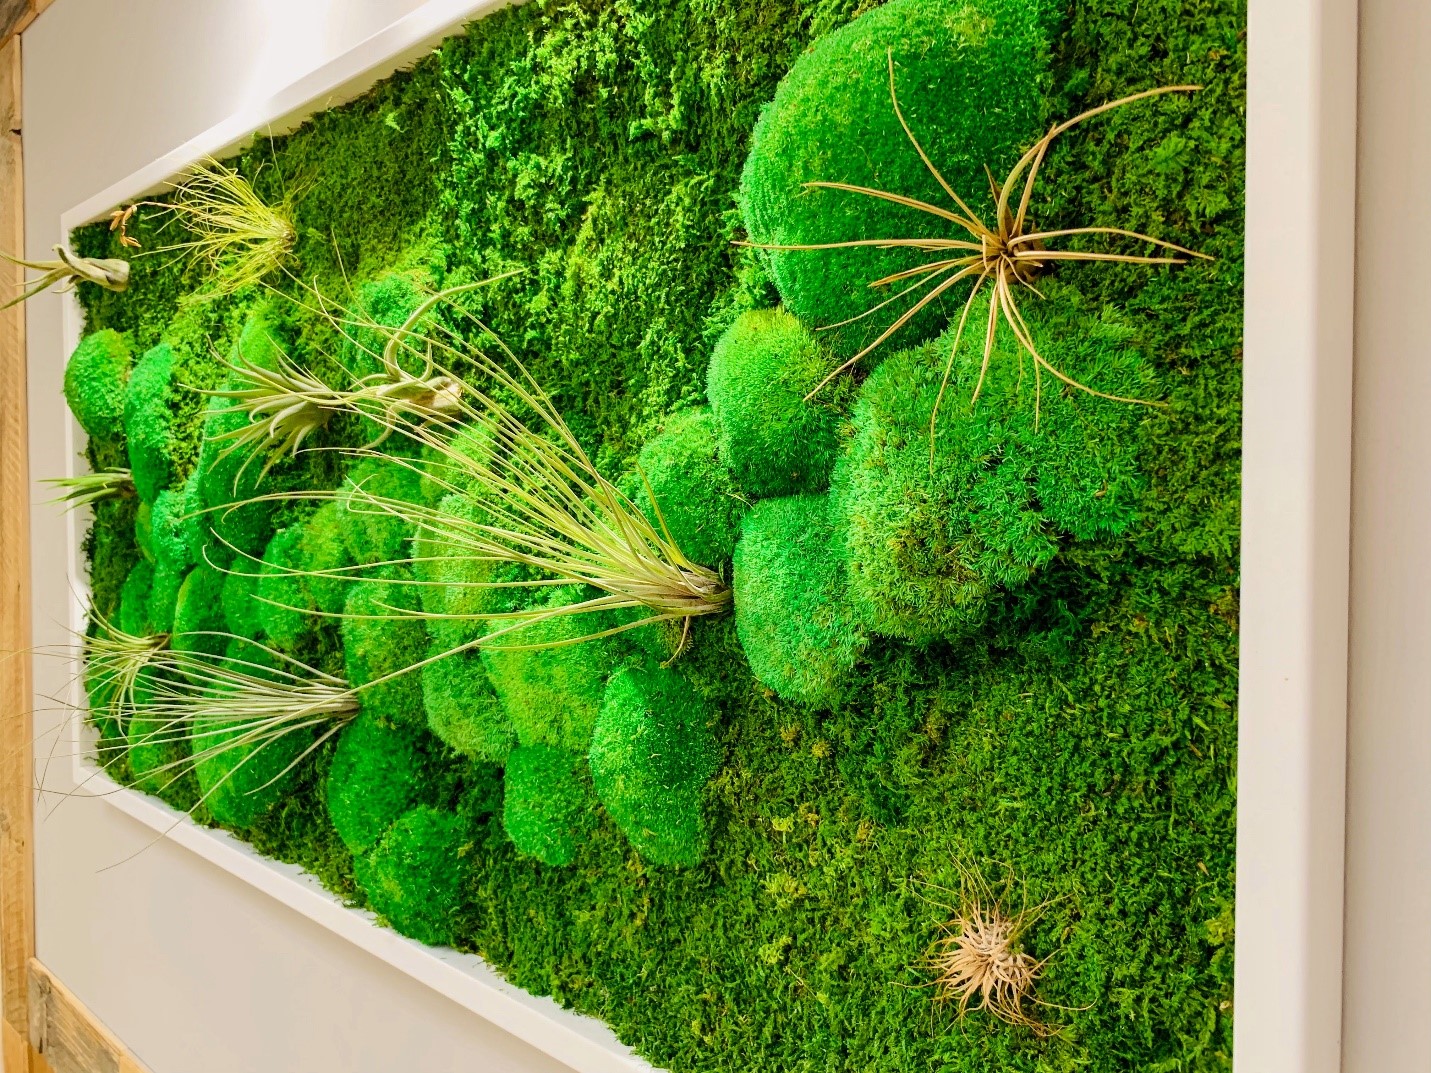 Benefits Of Growing Moss Indoors - What Are Those - Green Garden Tribe